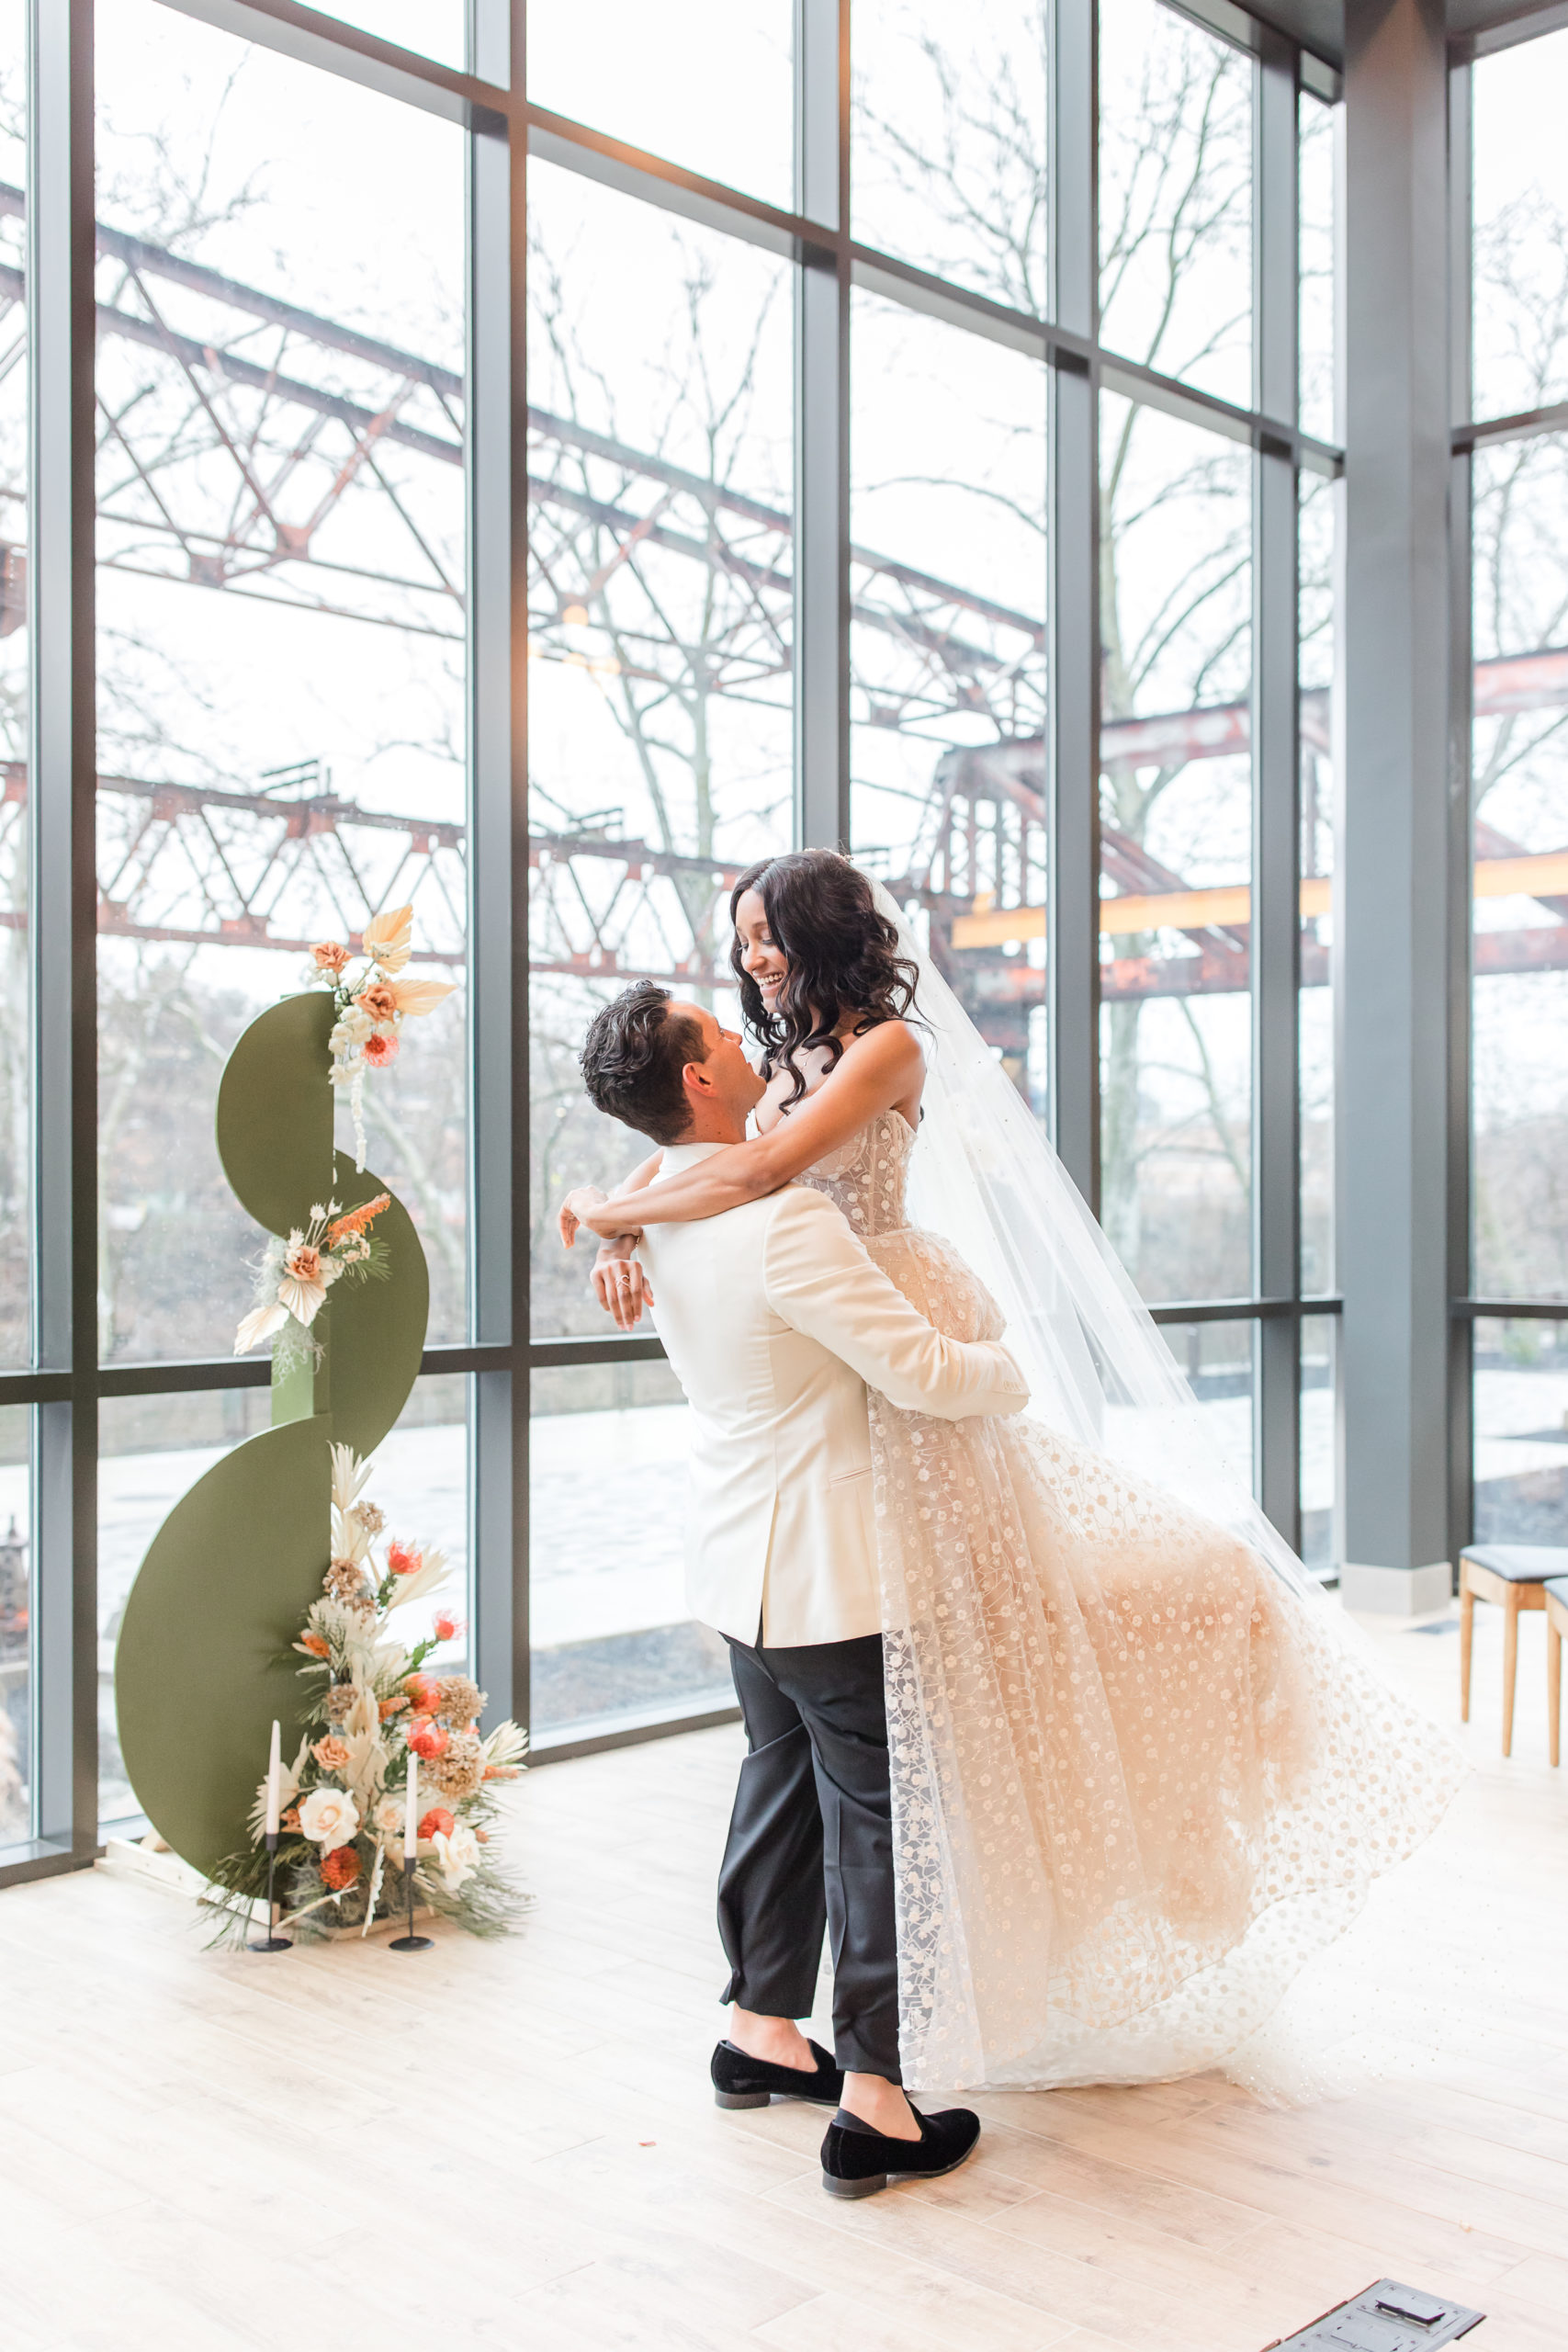 groom lifts bride with veil in front of iron windows in Philadelphia PA